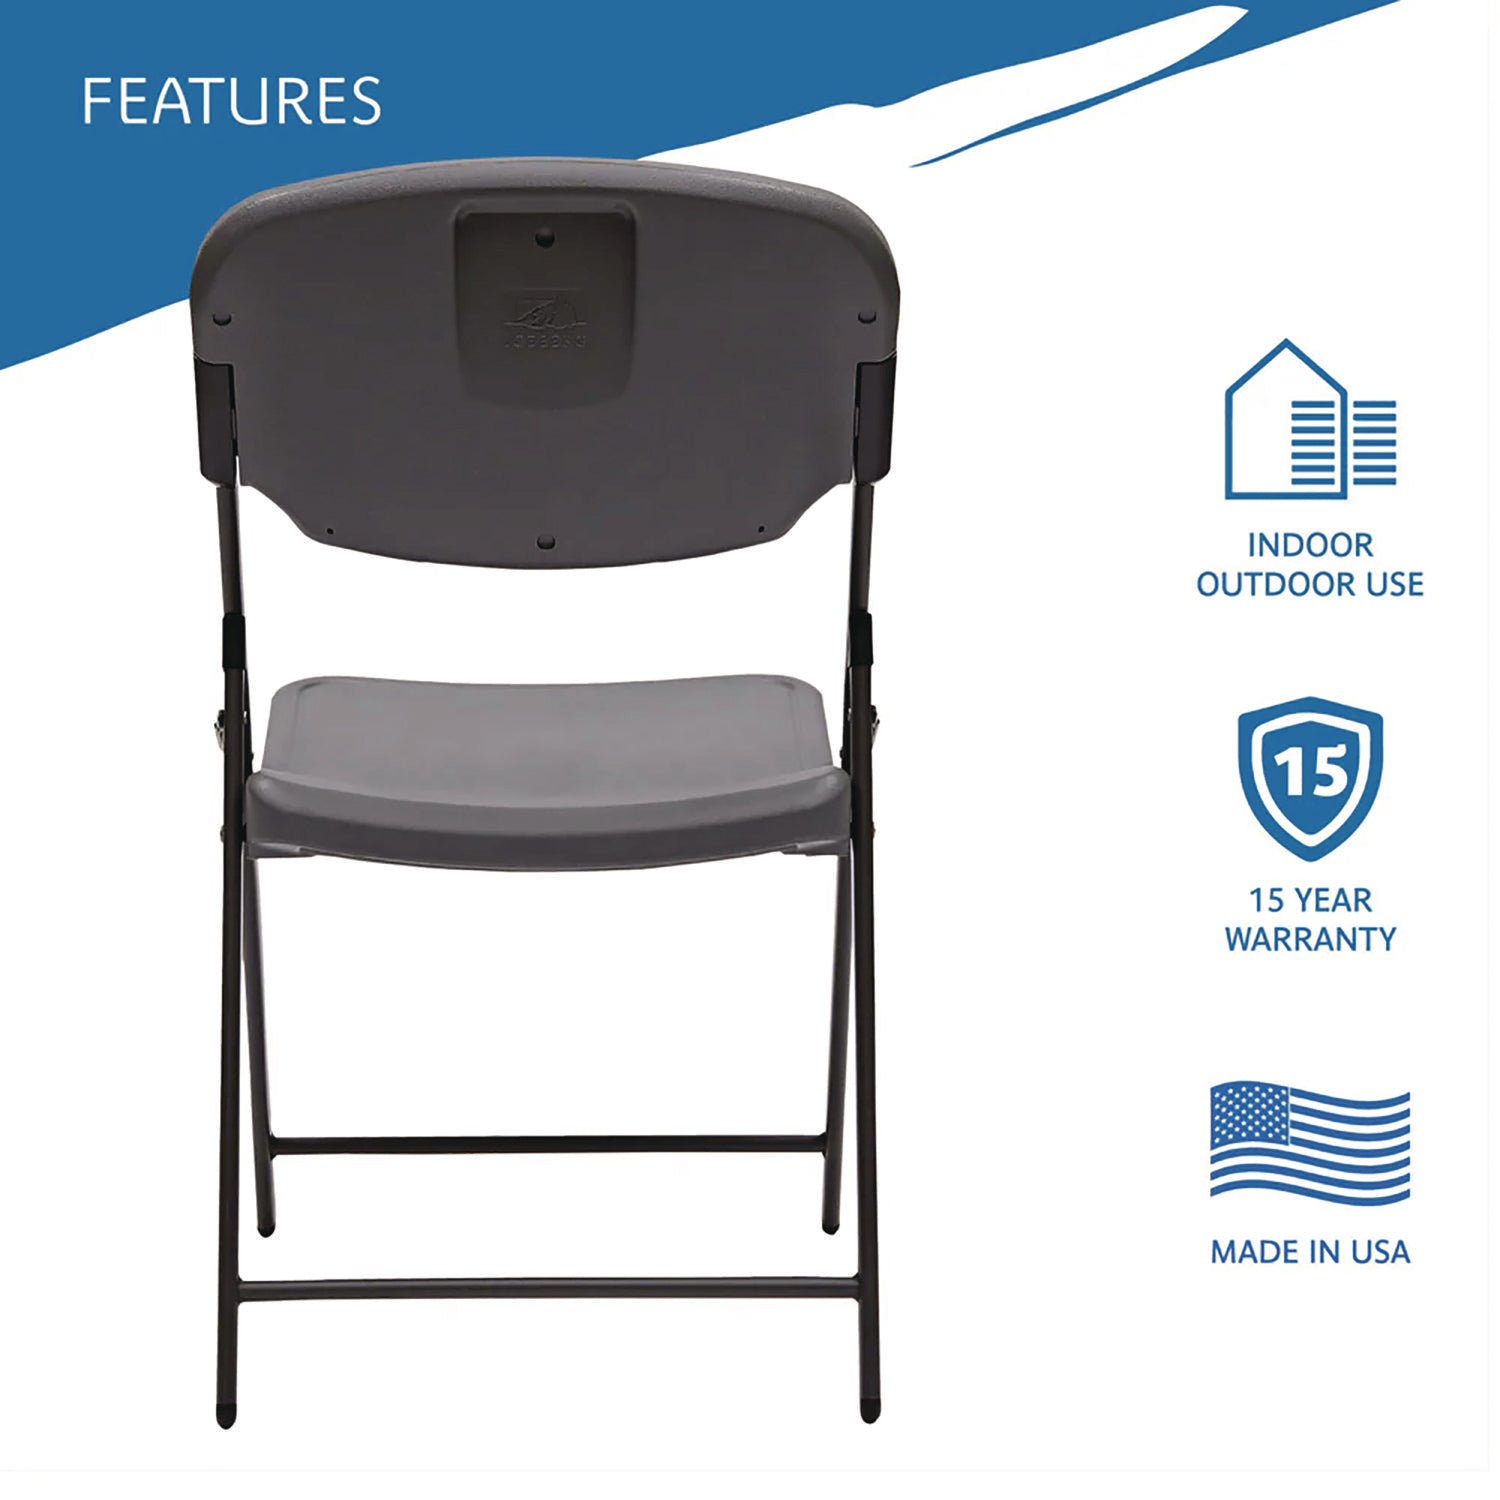 Rough n Ready Commercial Folding Chair, Supports Up to 350 lb, 15.25" Seat Height, Charcoal Seat, Charcoal Back, Silver Base - 3